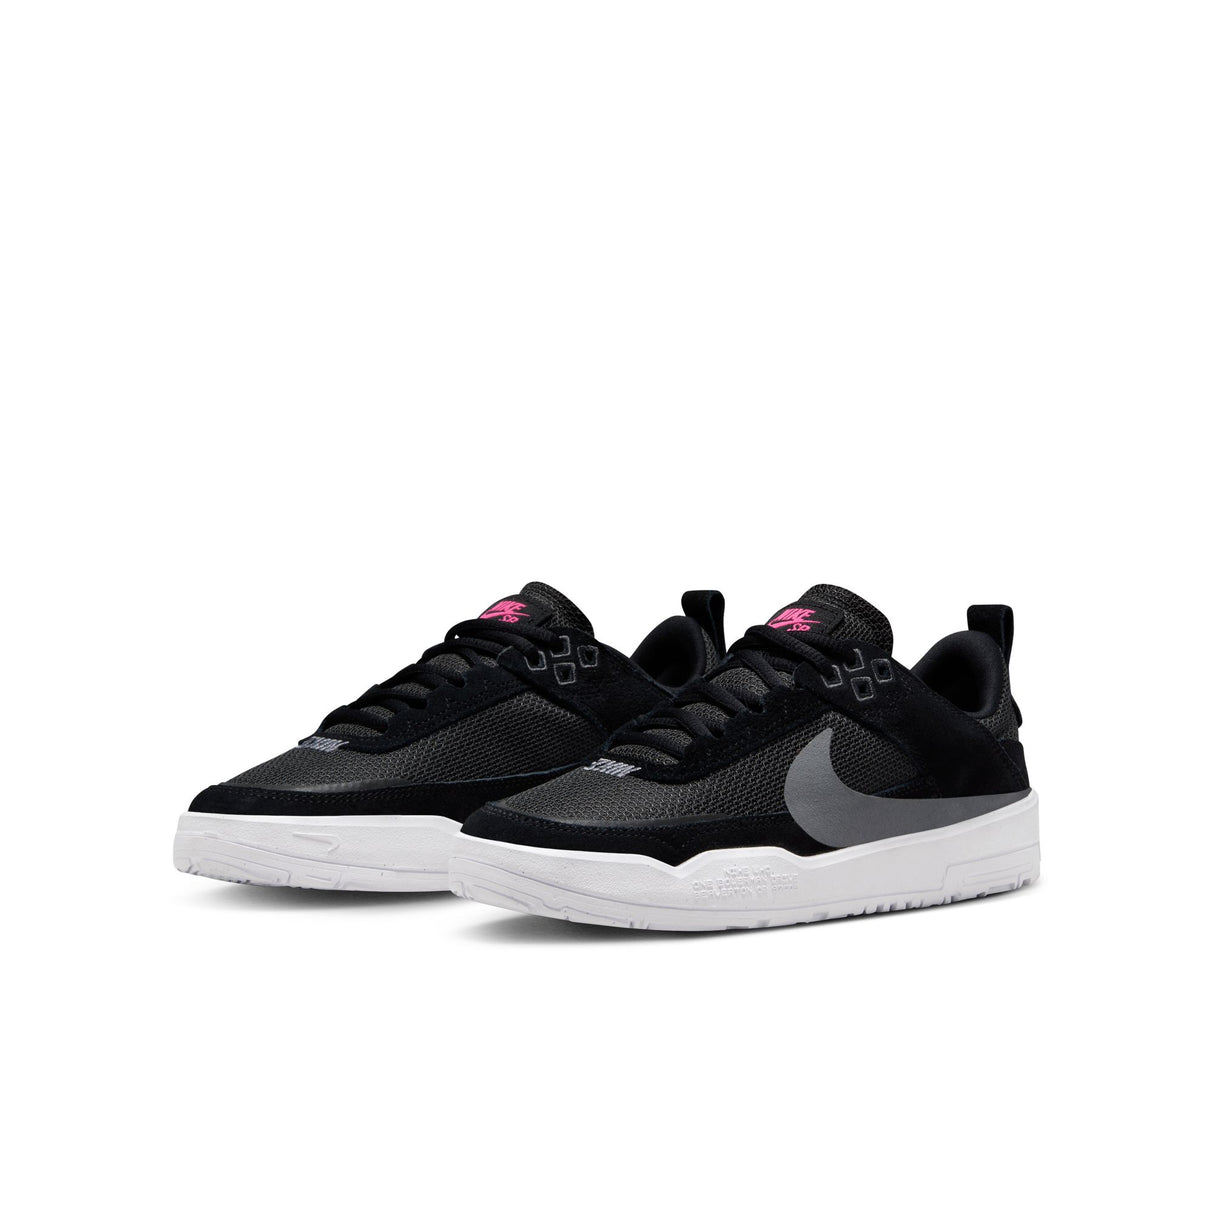 Nike SB Day One Black/Cool Grey Anthracite Youth Shoes